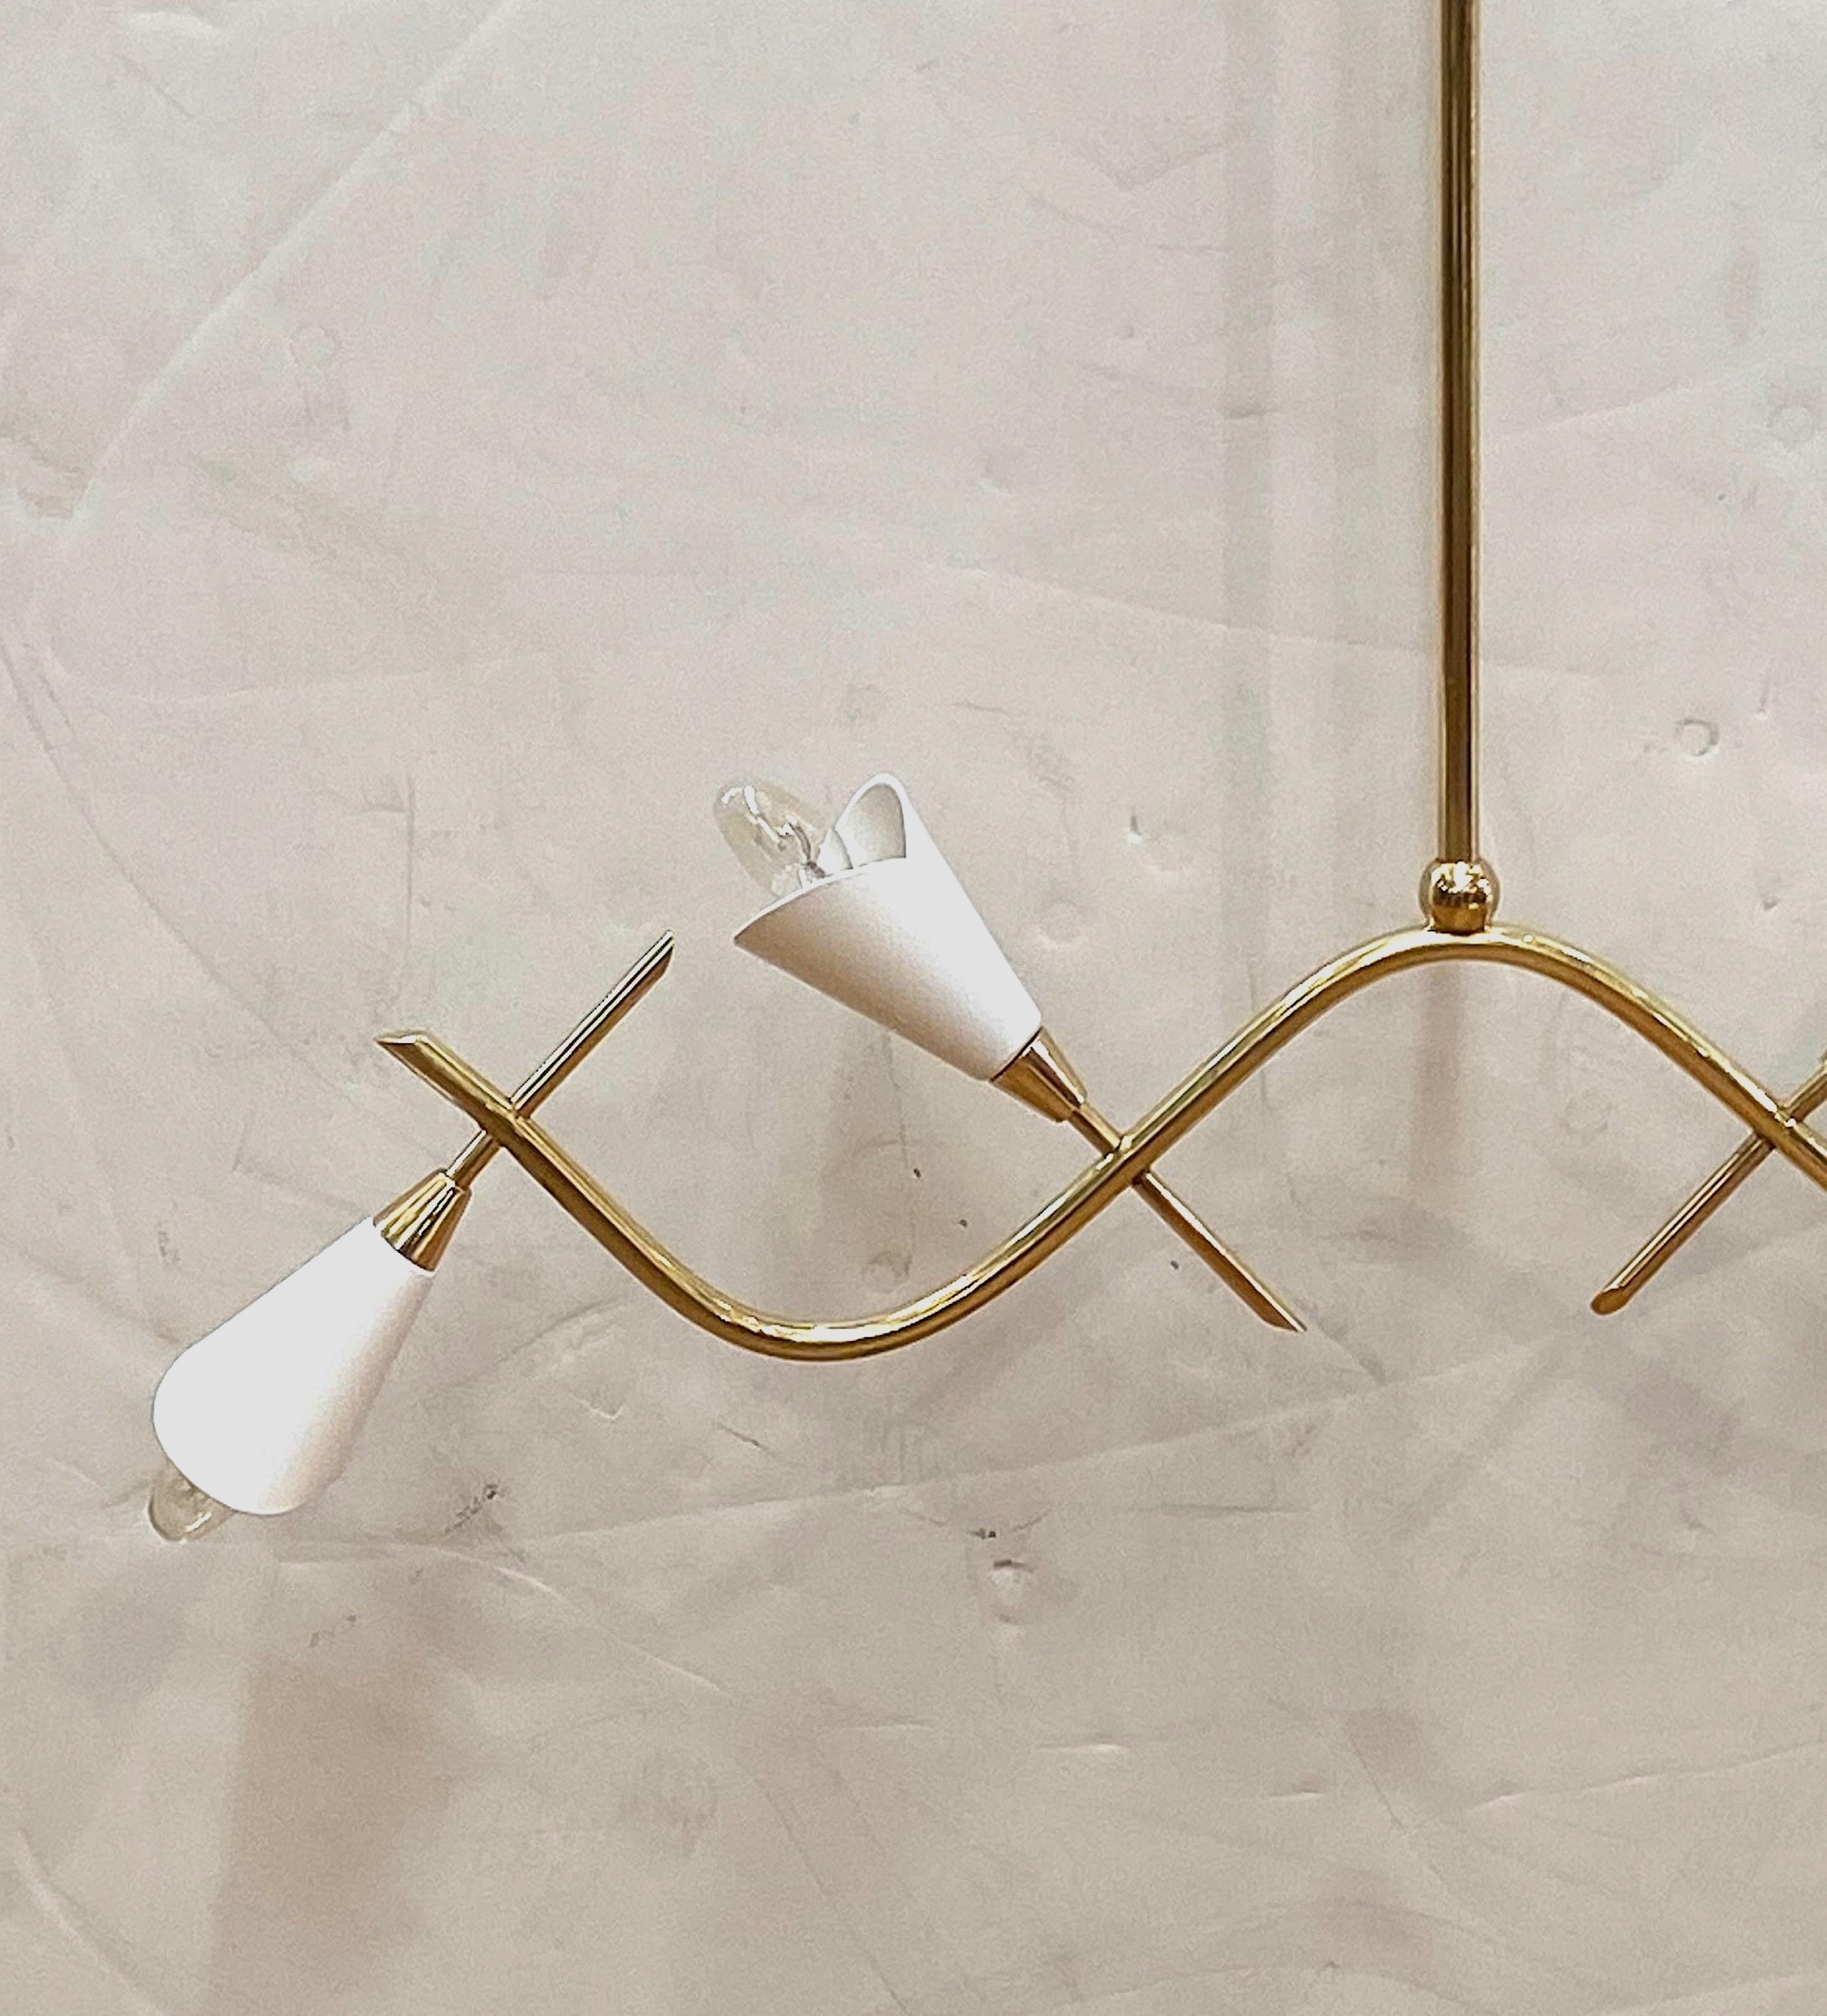 Italian 1950s Brass and White Enamel Pendant Light Chandelier In Good Condition For Sale In New York, NY